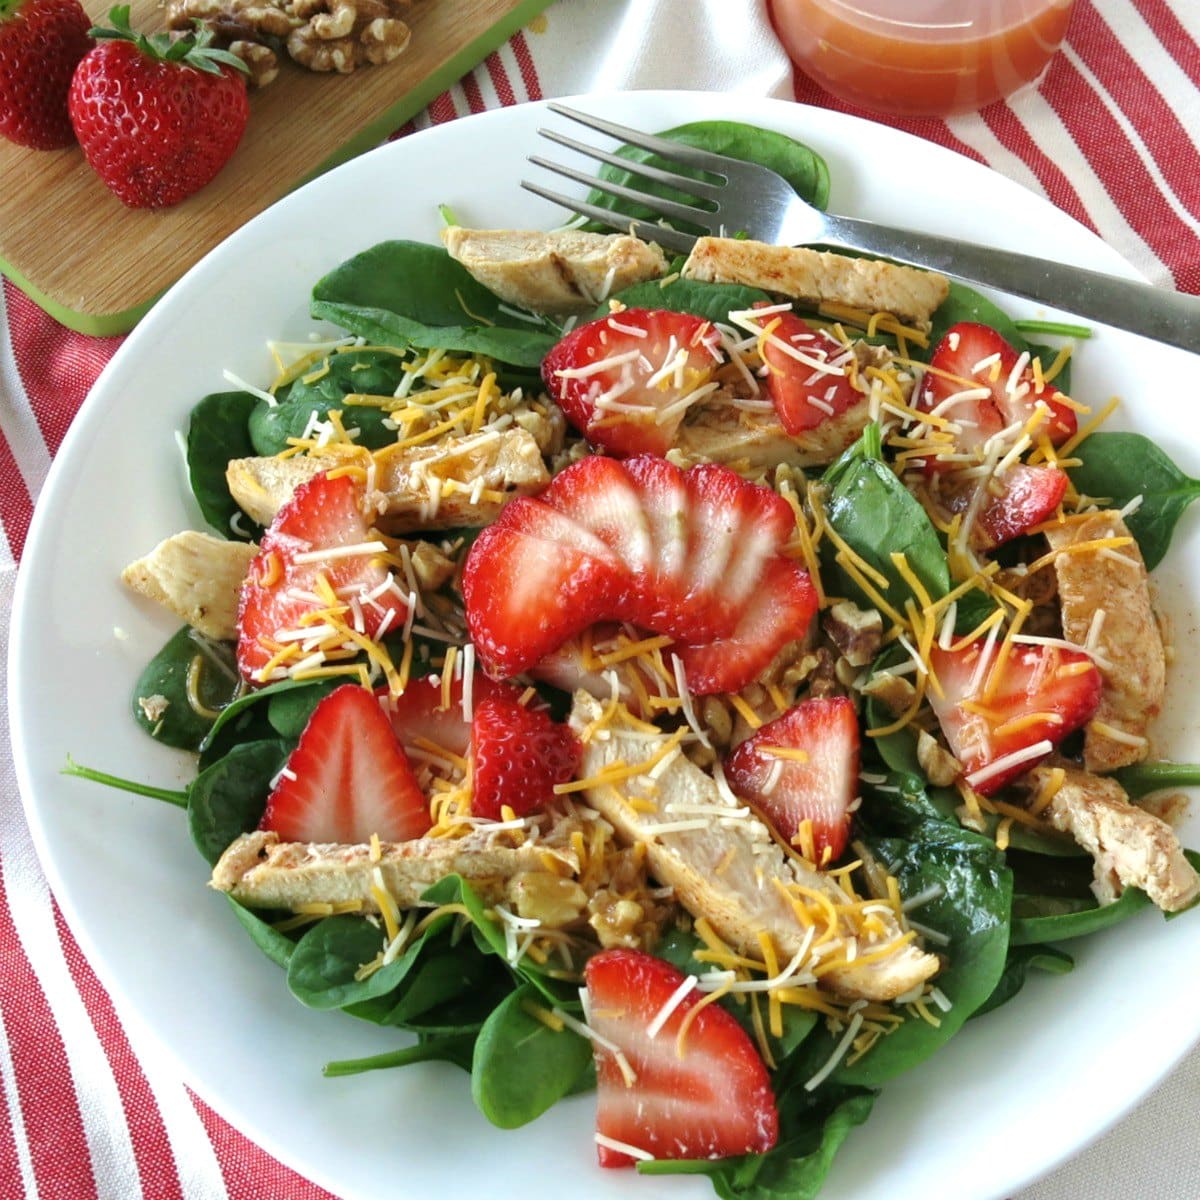 Spinach Strawberry Walnut Salad topped with chicken on a plate with walnuts and dressing in the background.